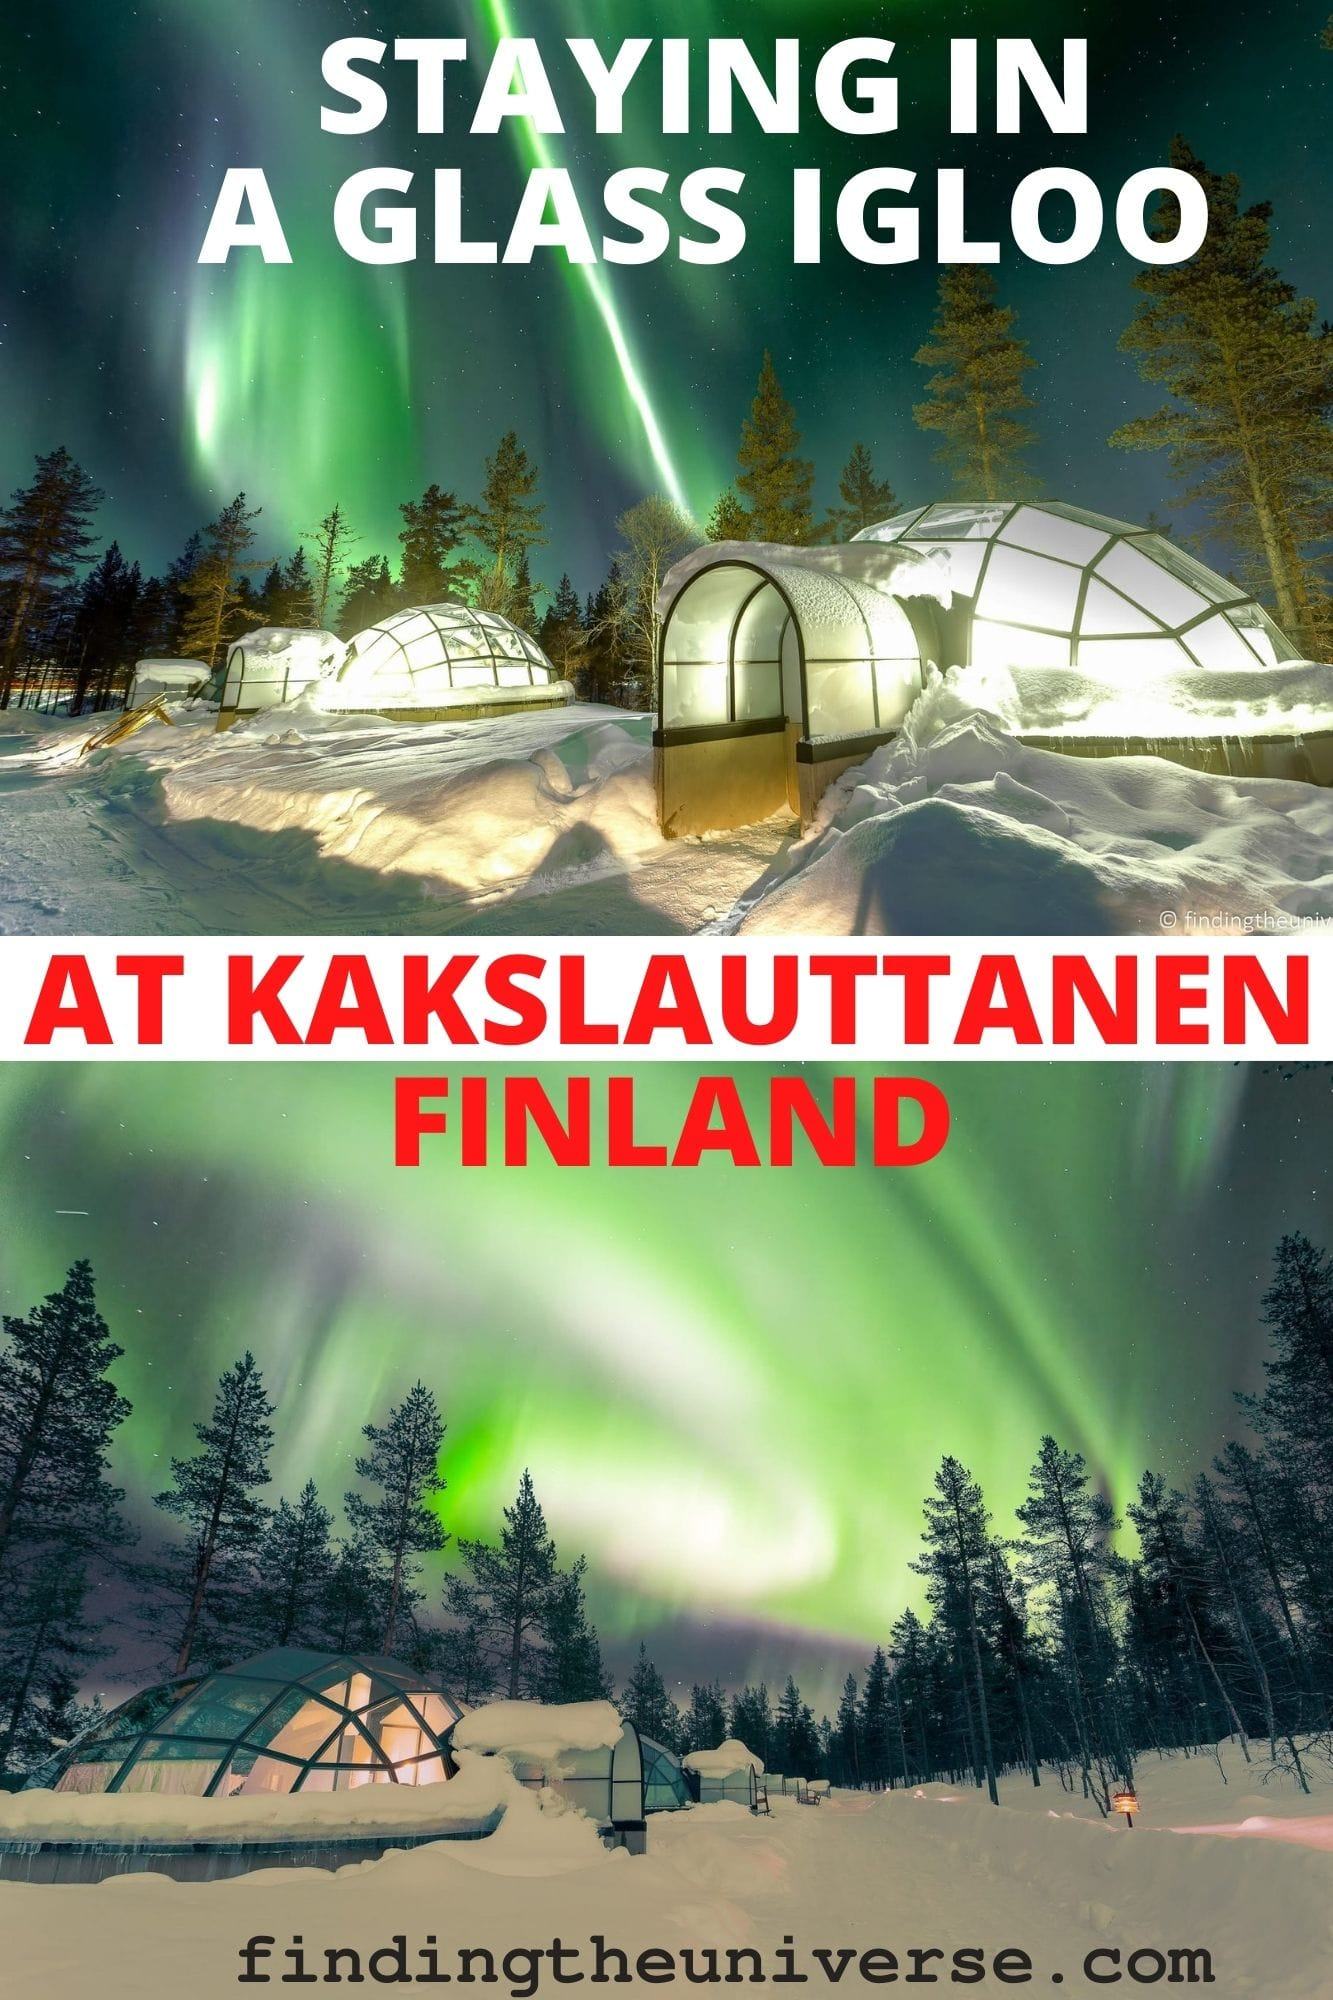 Detailed review of Kakslauttanen Arctic Resort in Finland. Everything you need to know to plan your stay at these glass igloos in Finland!